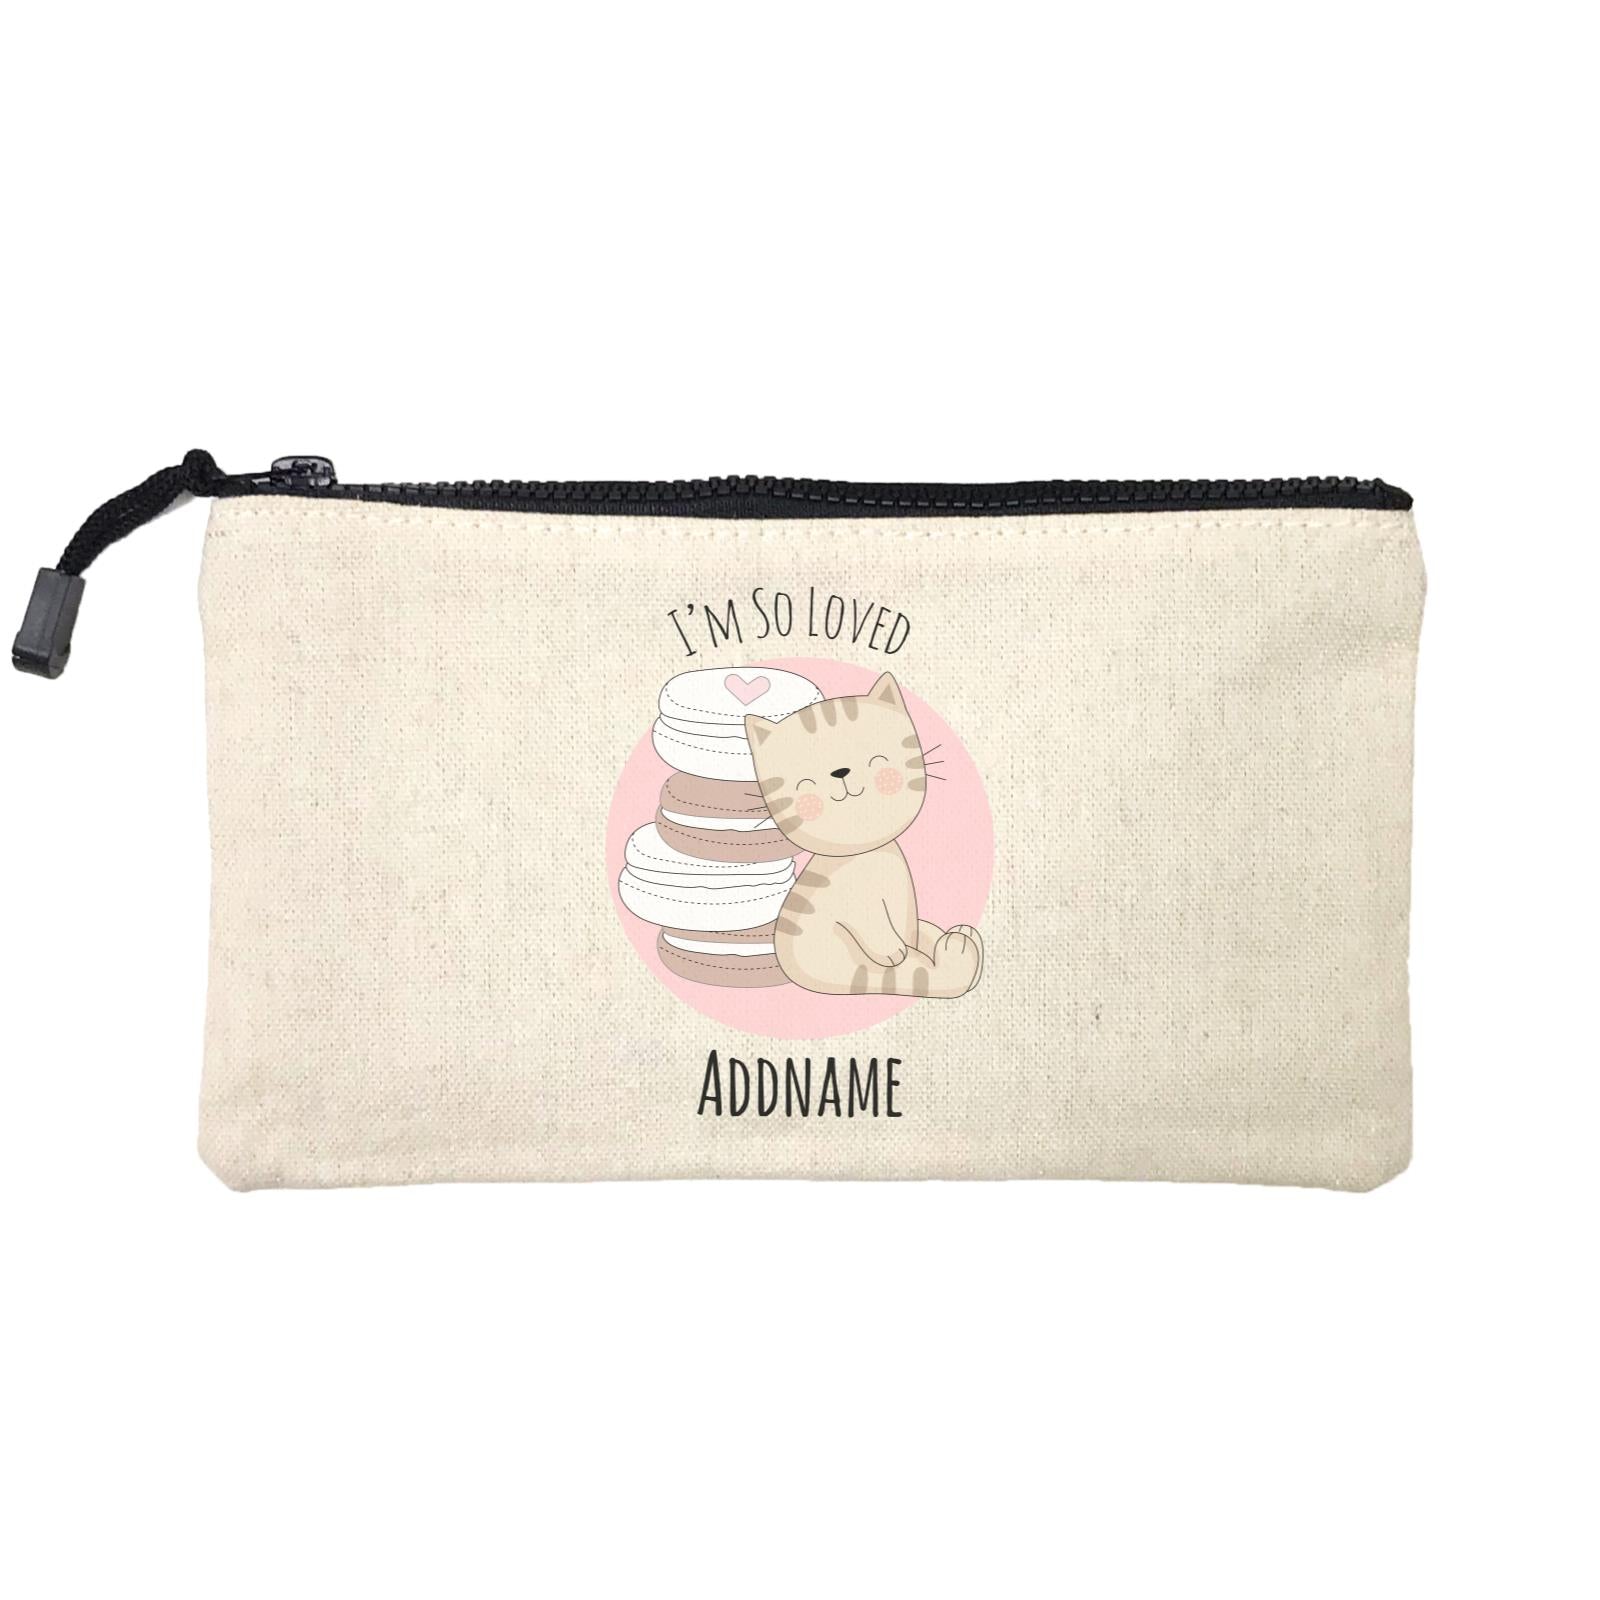 Sweet Animals Sketches Cat Macaroons I'm So Loved Addname Mini Accessories Stationery Pouch